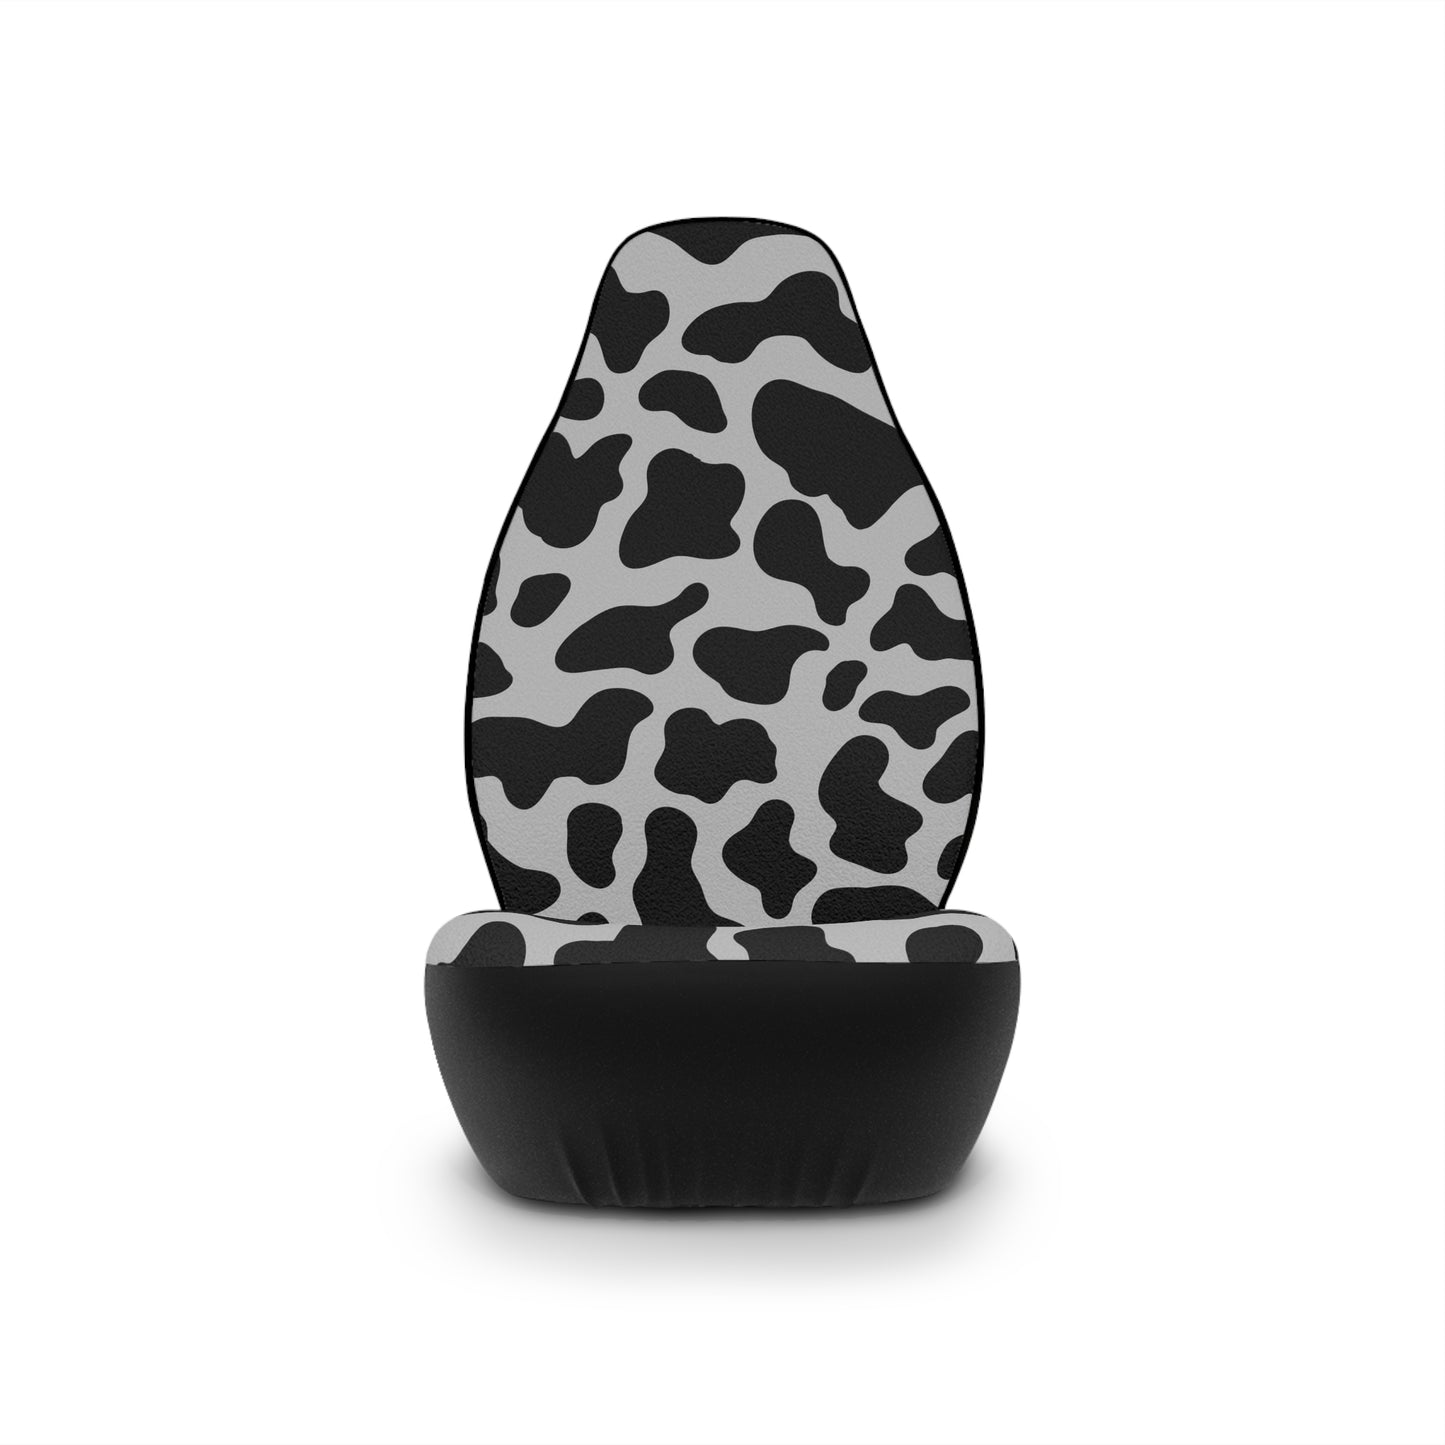 Cow Print Car Seat Cover